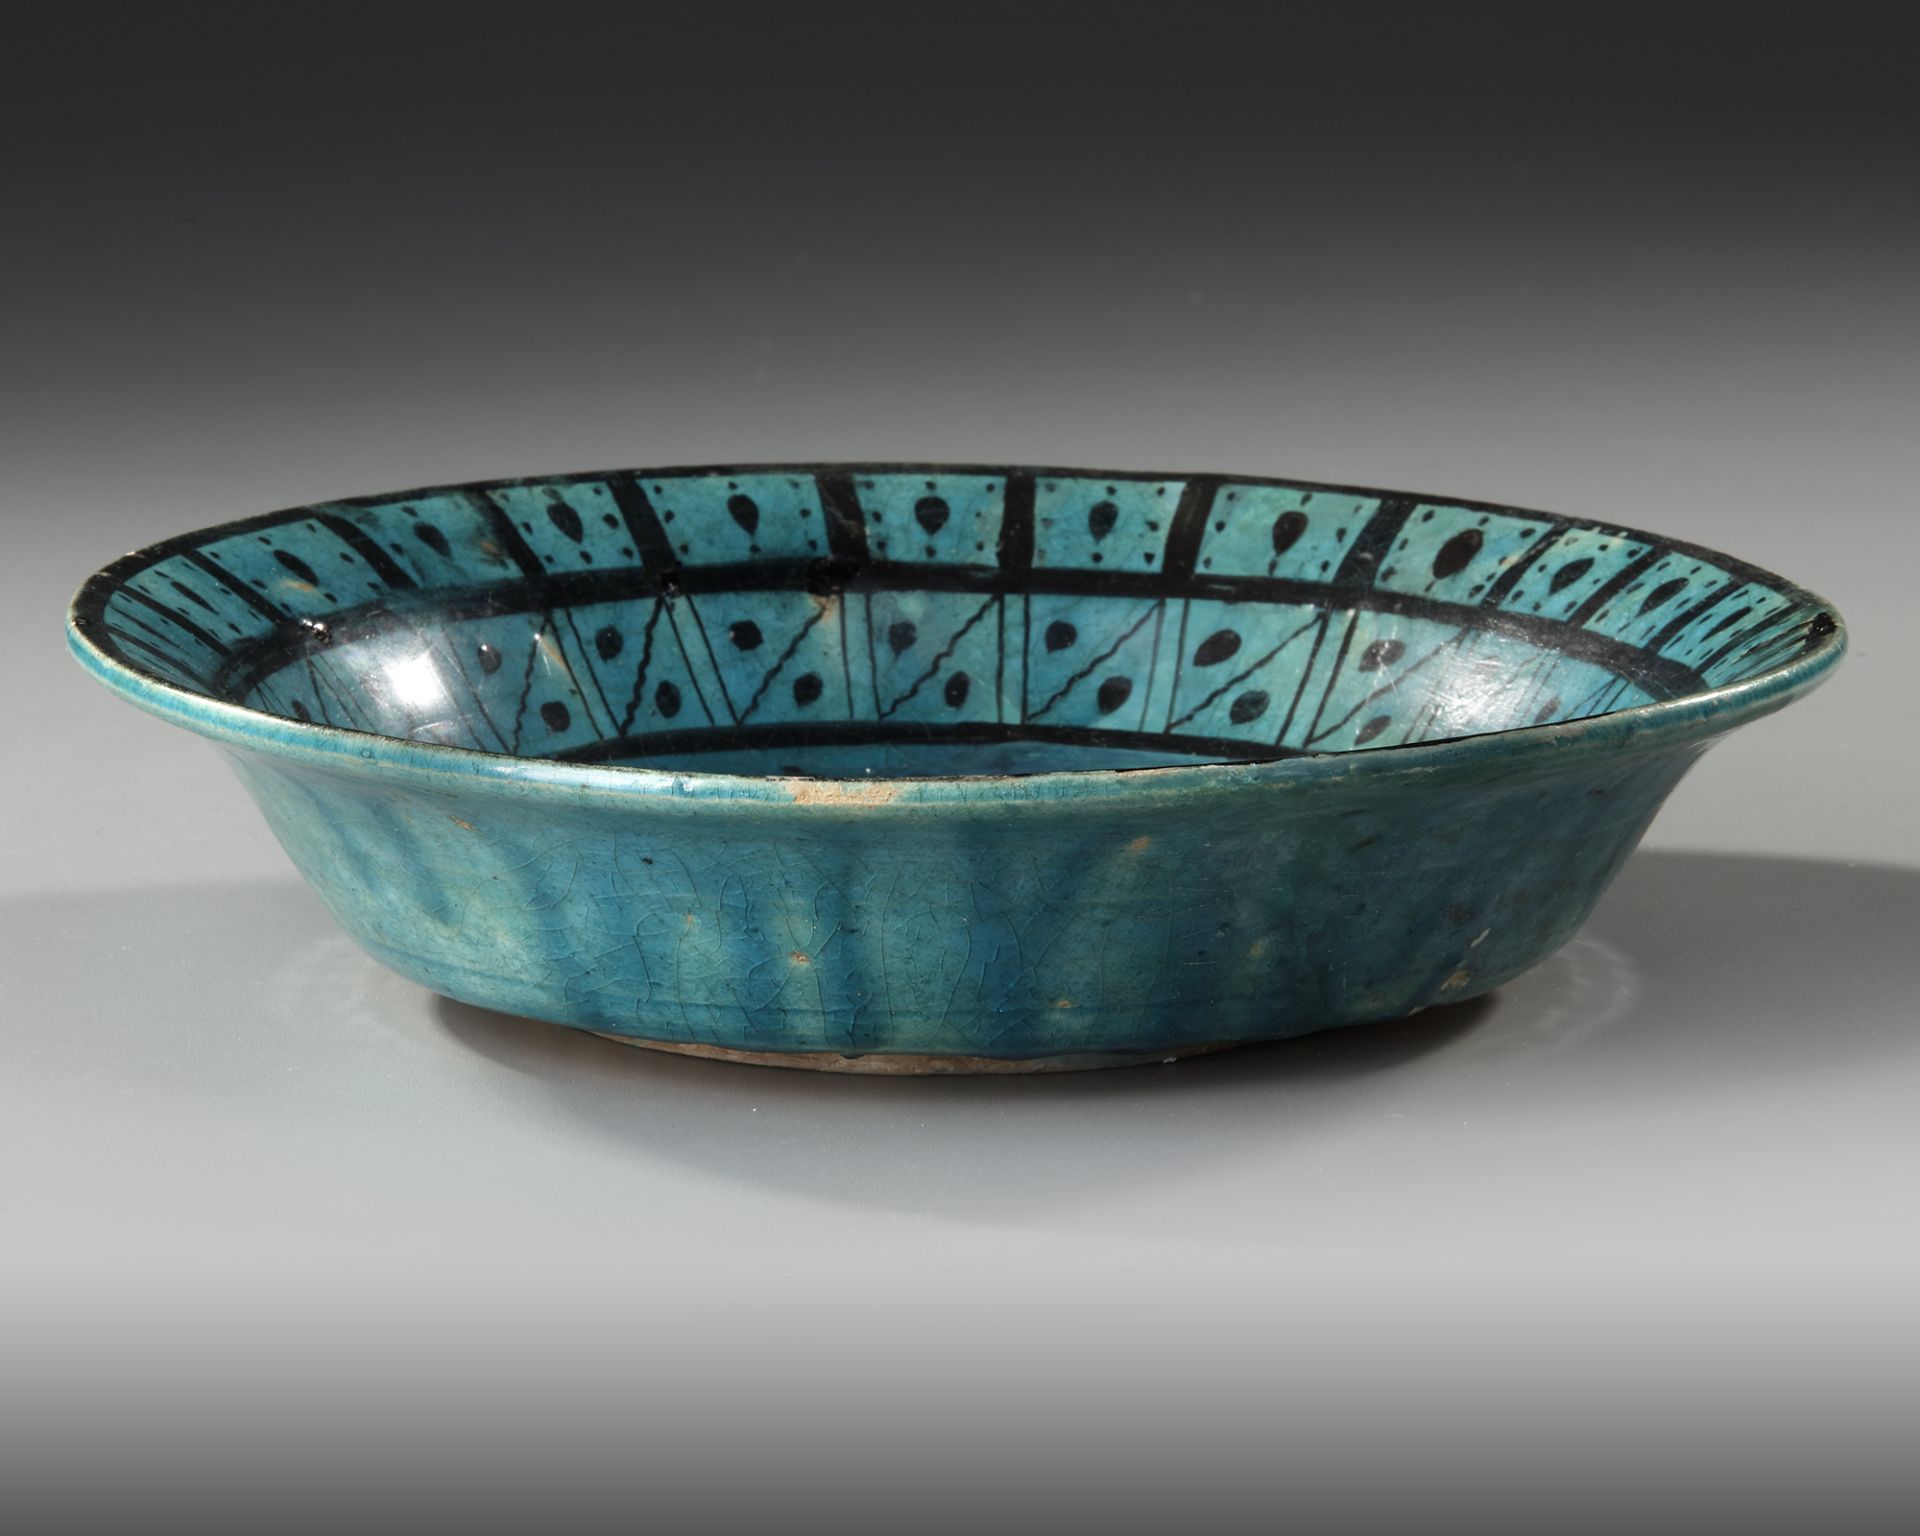 A RAQQA TURQUOISE-GLAZED POTTERY DISH, SYRIA, EARLY 13TH CENTURY - Image 3 of 8